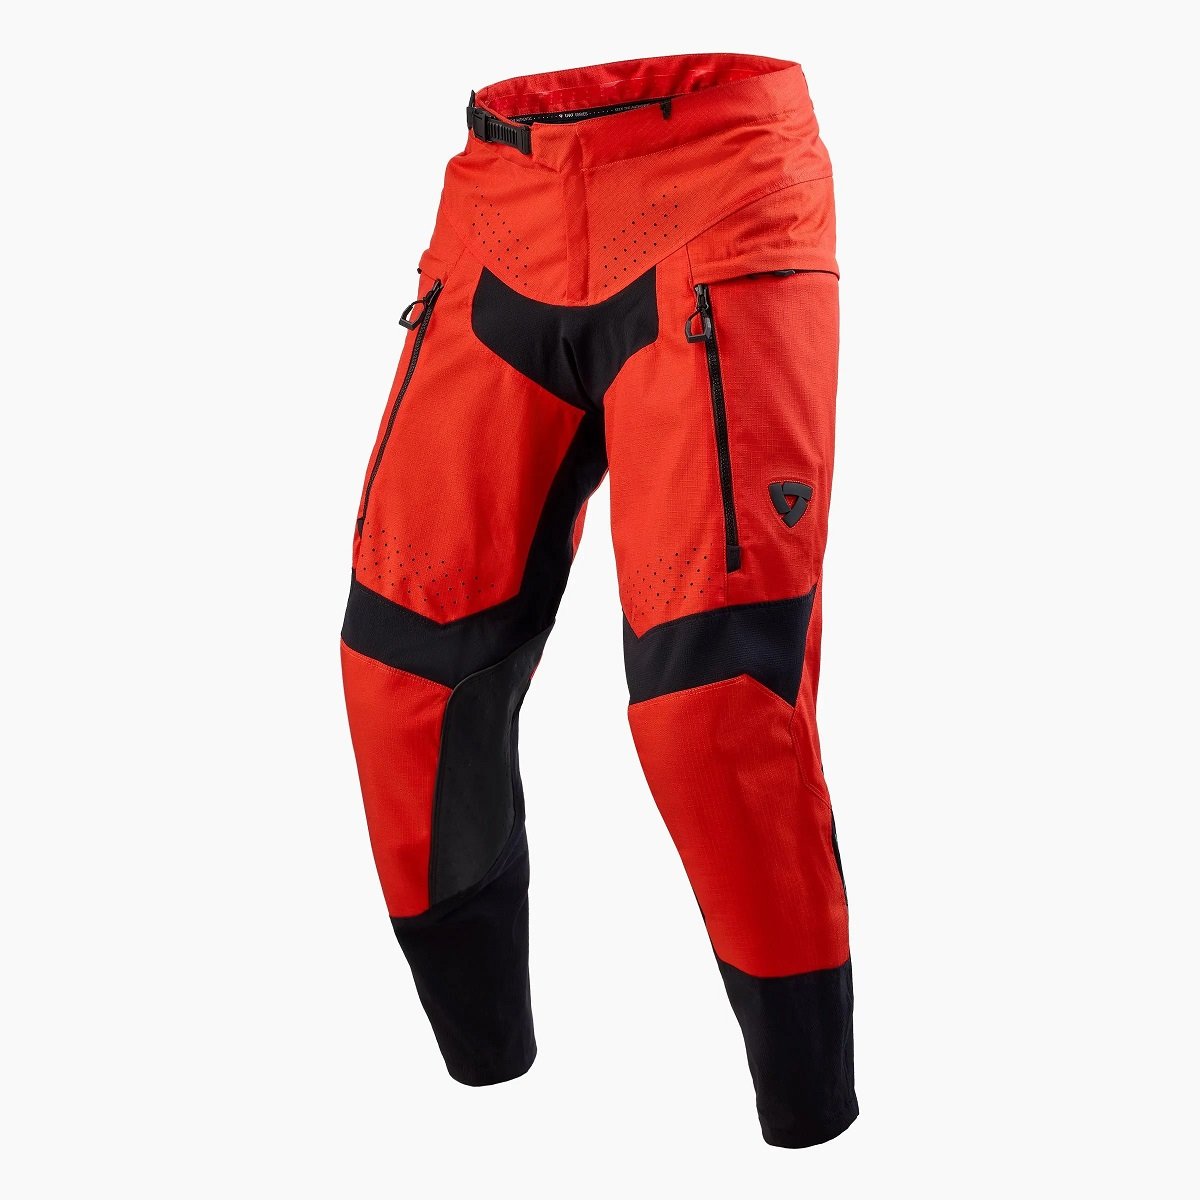 Image of REV'IT! Peninsula Trousers Red Motorcycle Pants Talla M